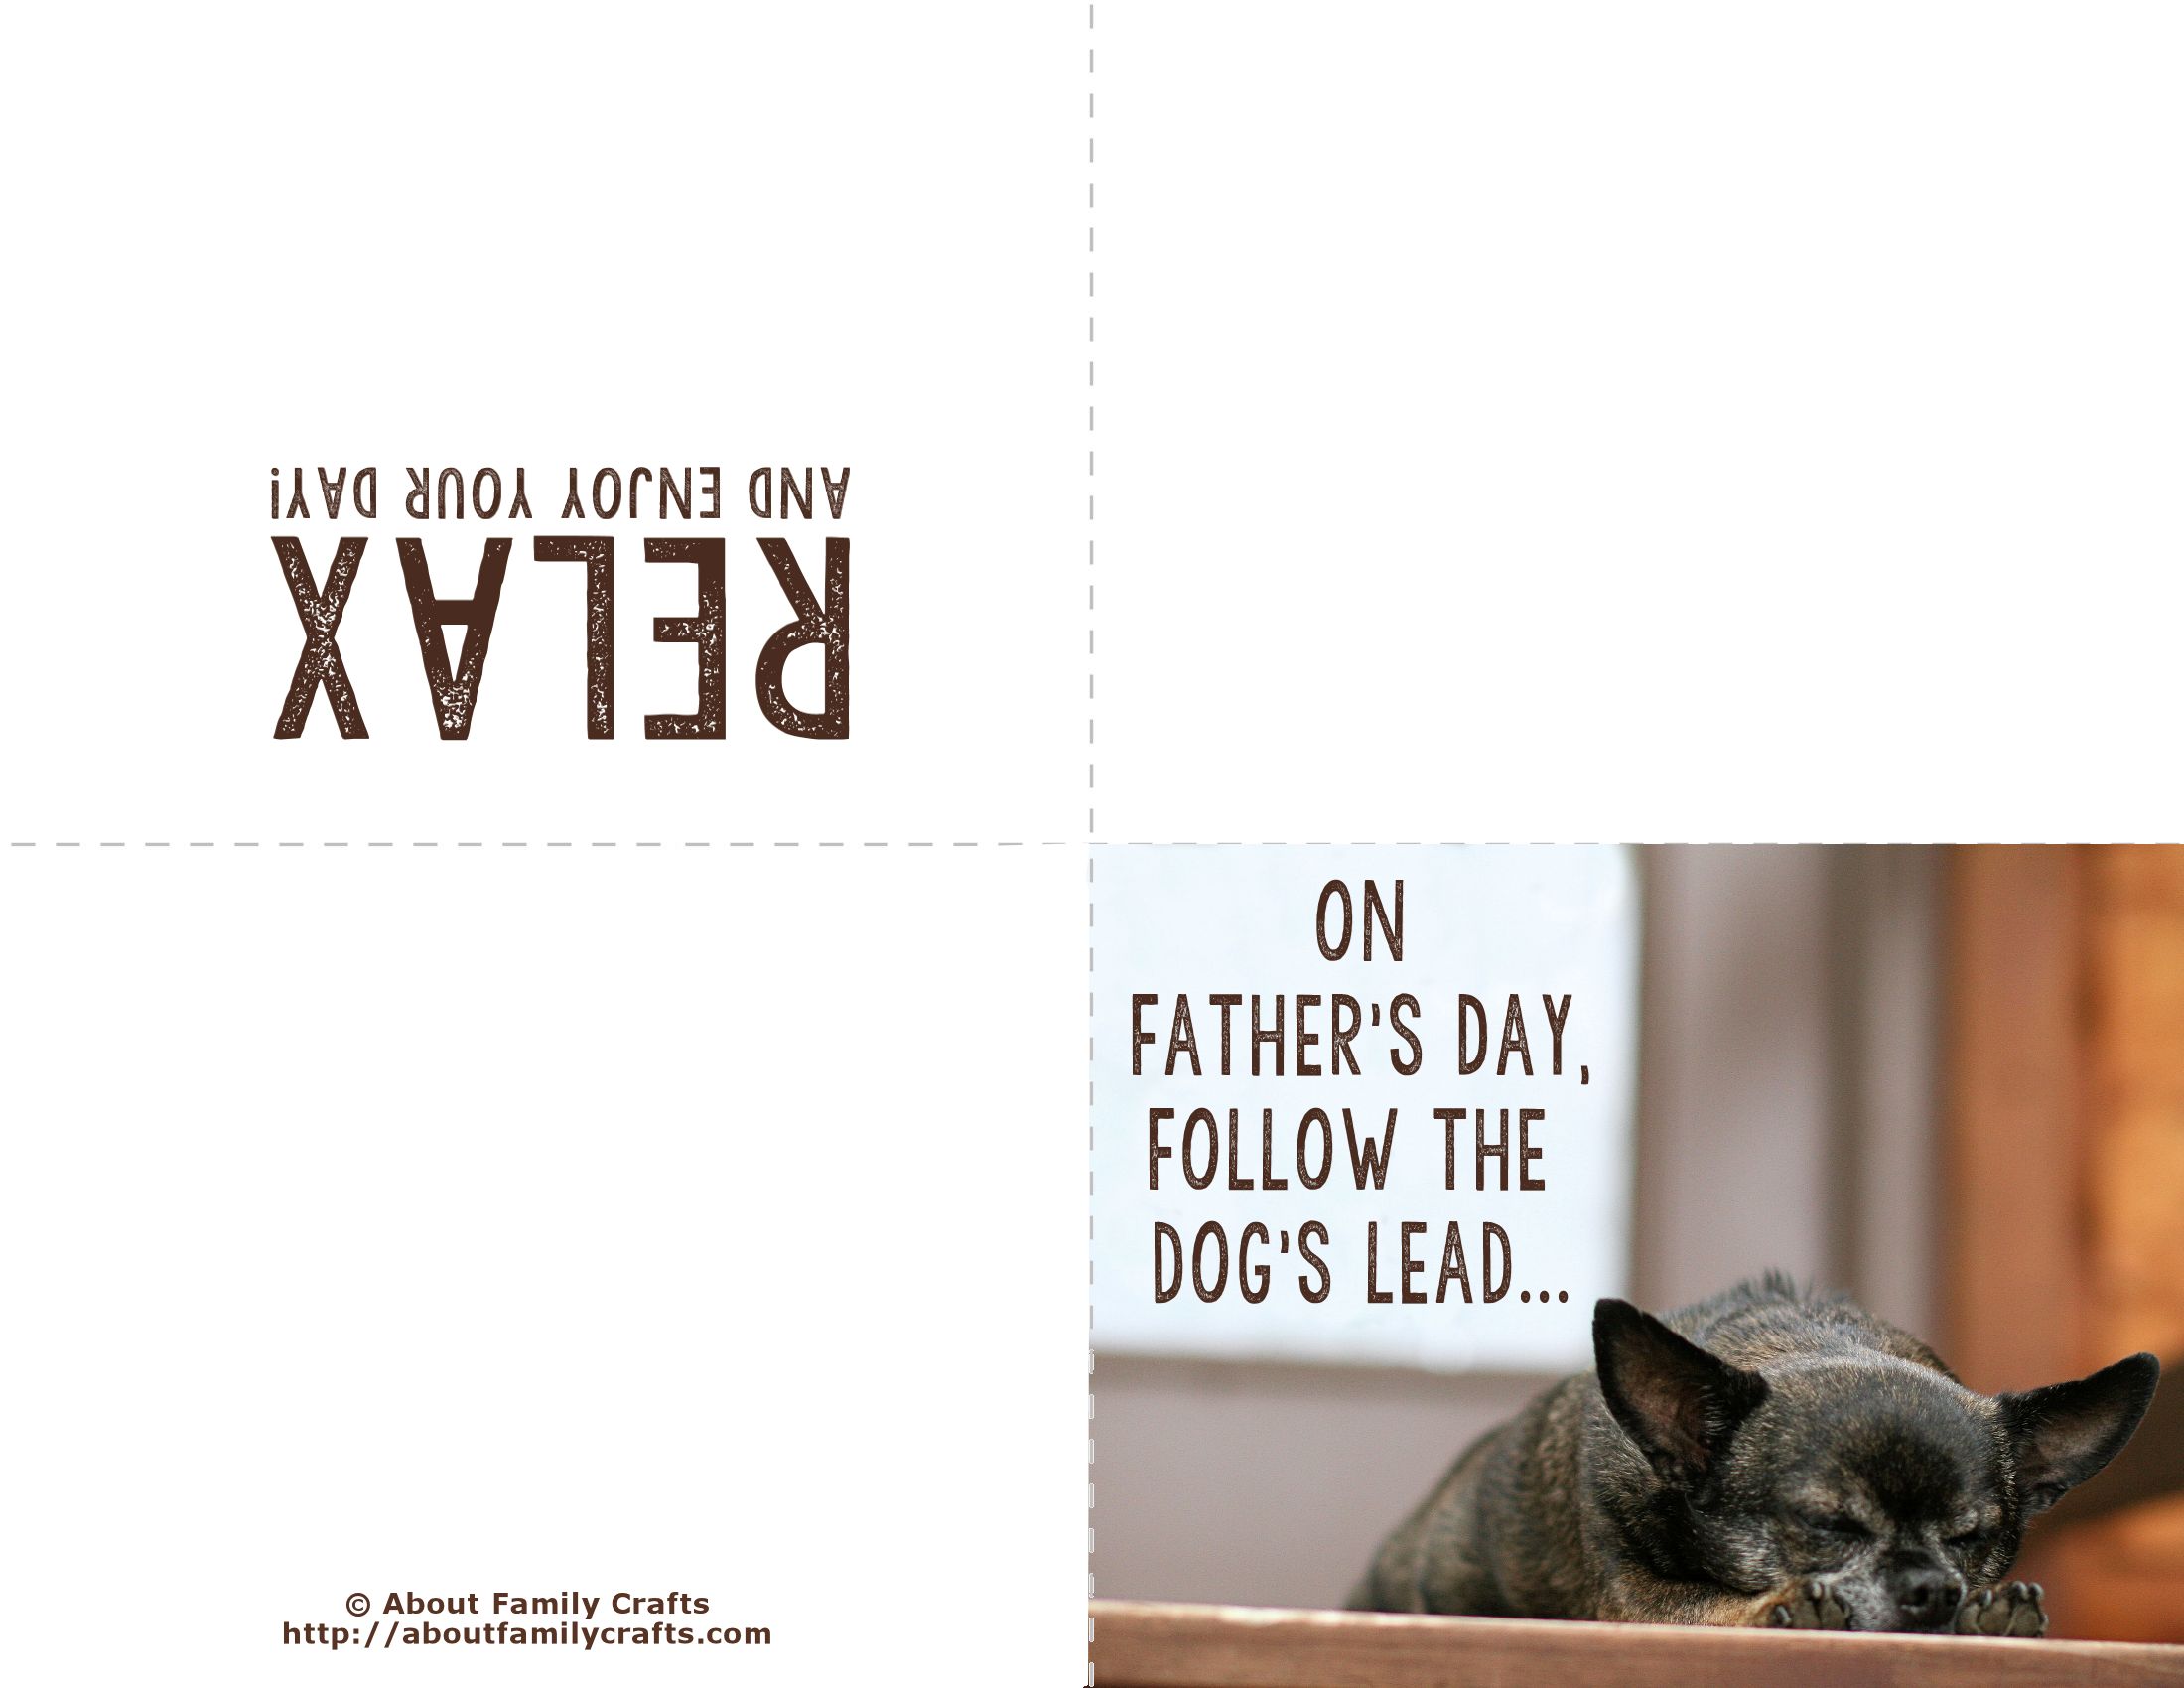 convert jpg to pdf reddit Printable father card cards dog fathers pdf